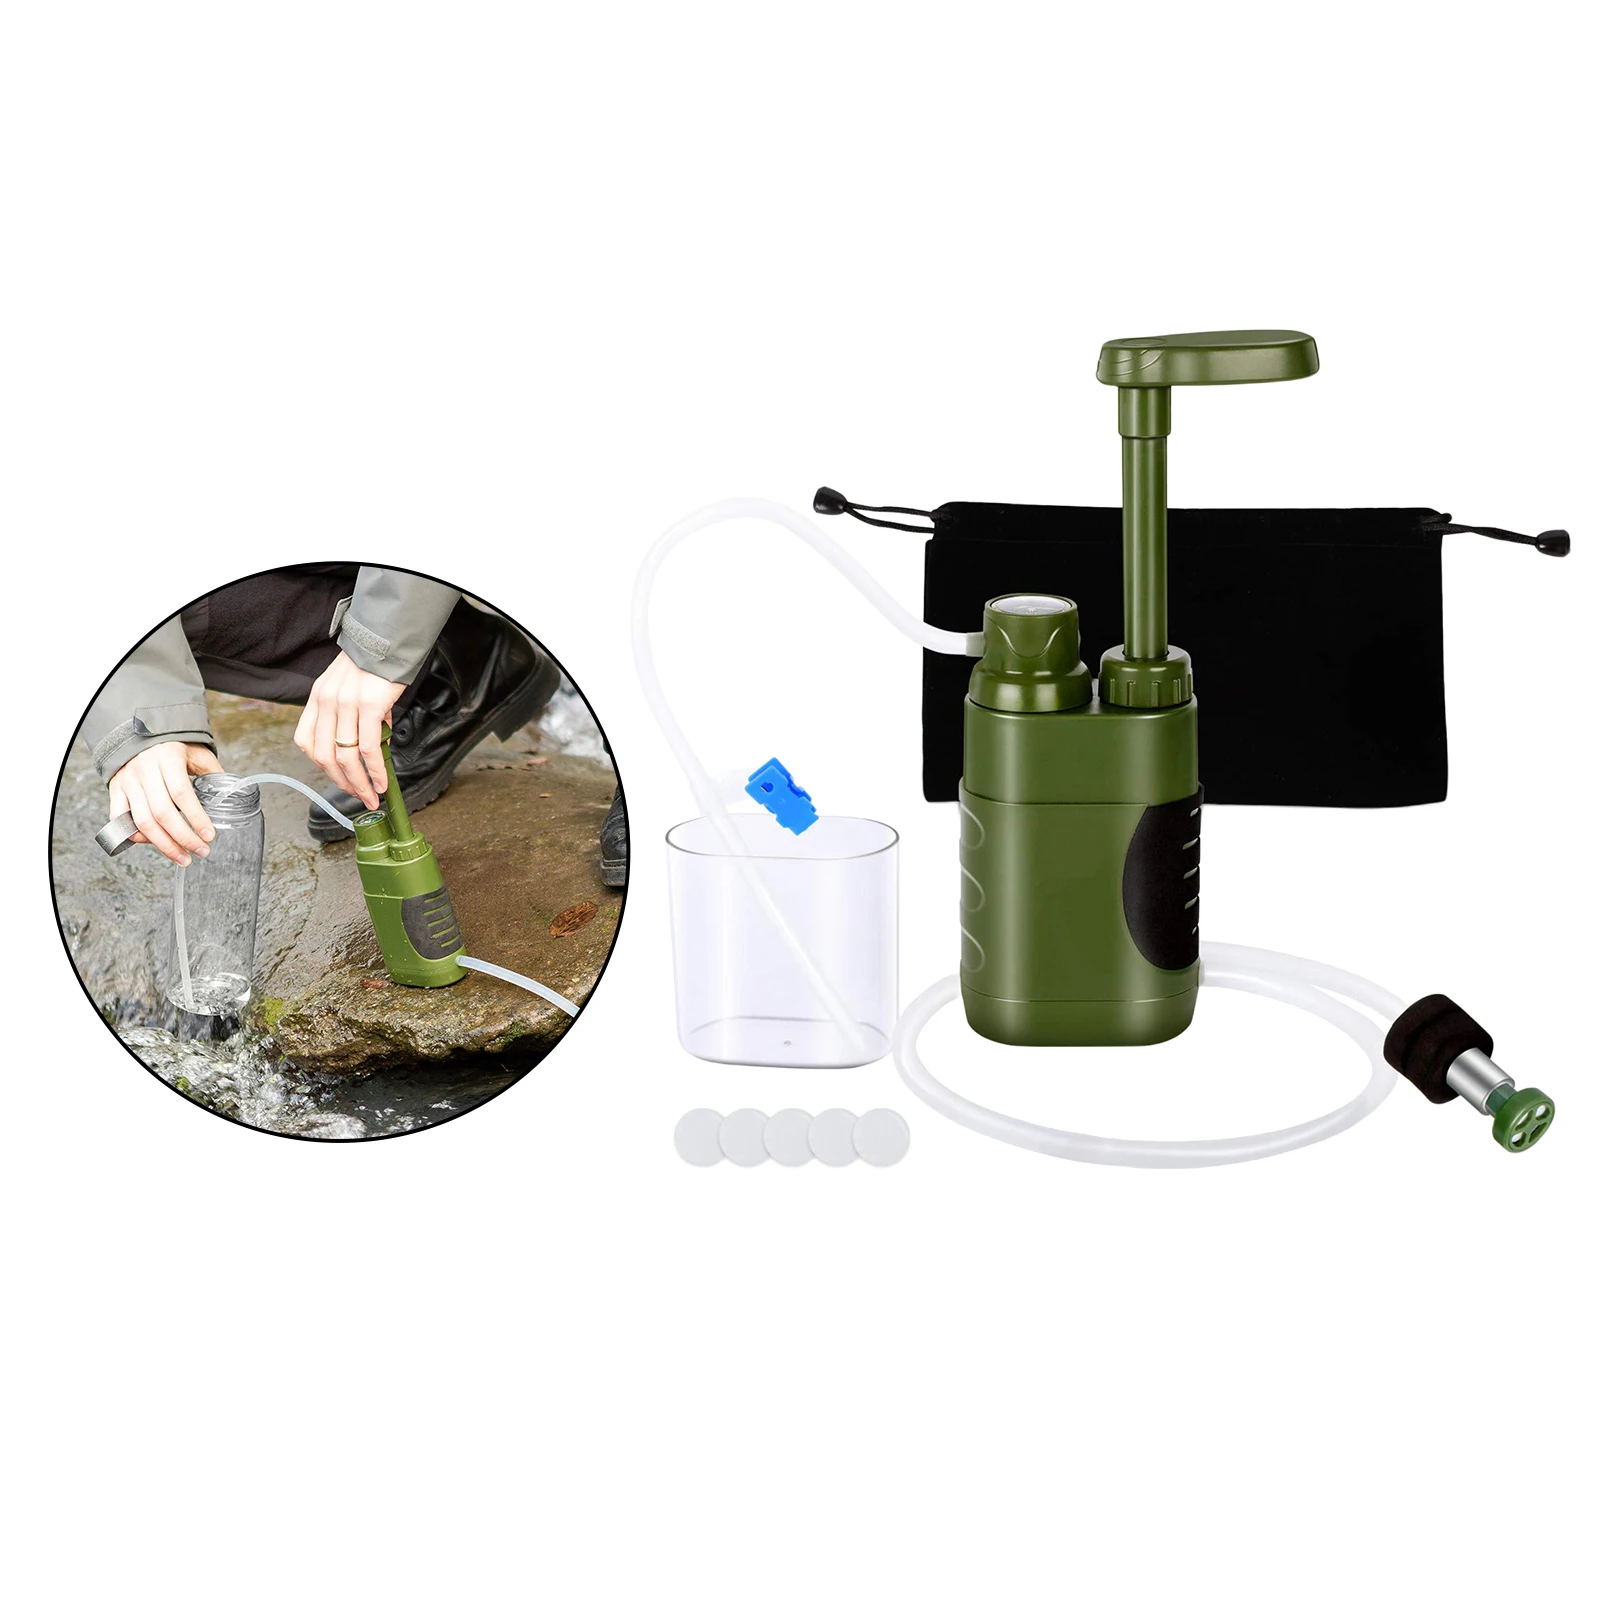 Portable Outdoor Survival Water Filter Personal Gravity Purifier Filtration, for Outdoor Camping Hiking